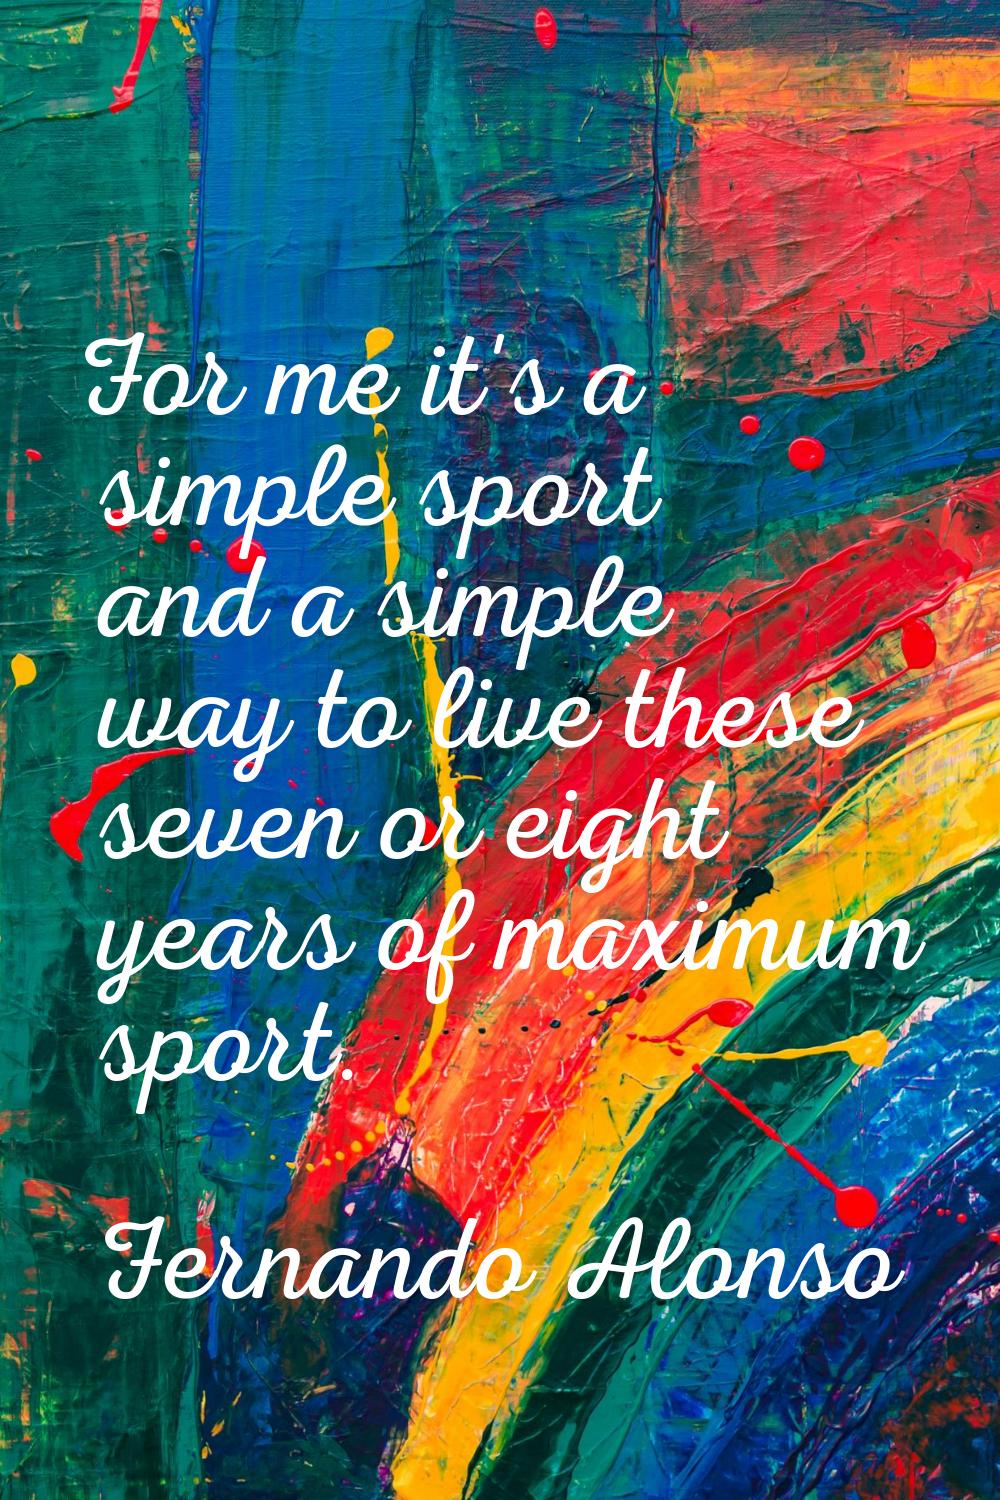 For me it's a simple sport and a simple way to live these seven or eight years of maximum sport.